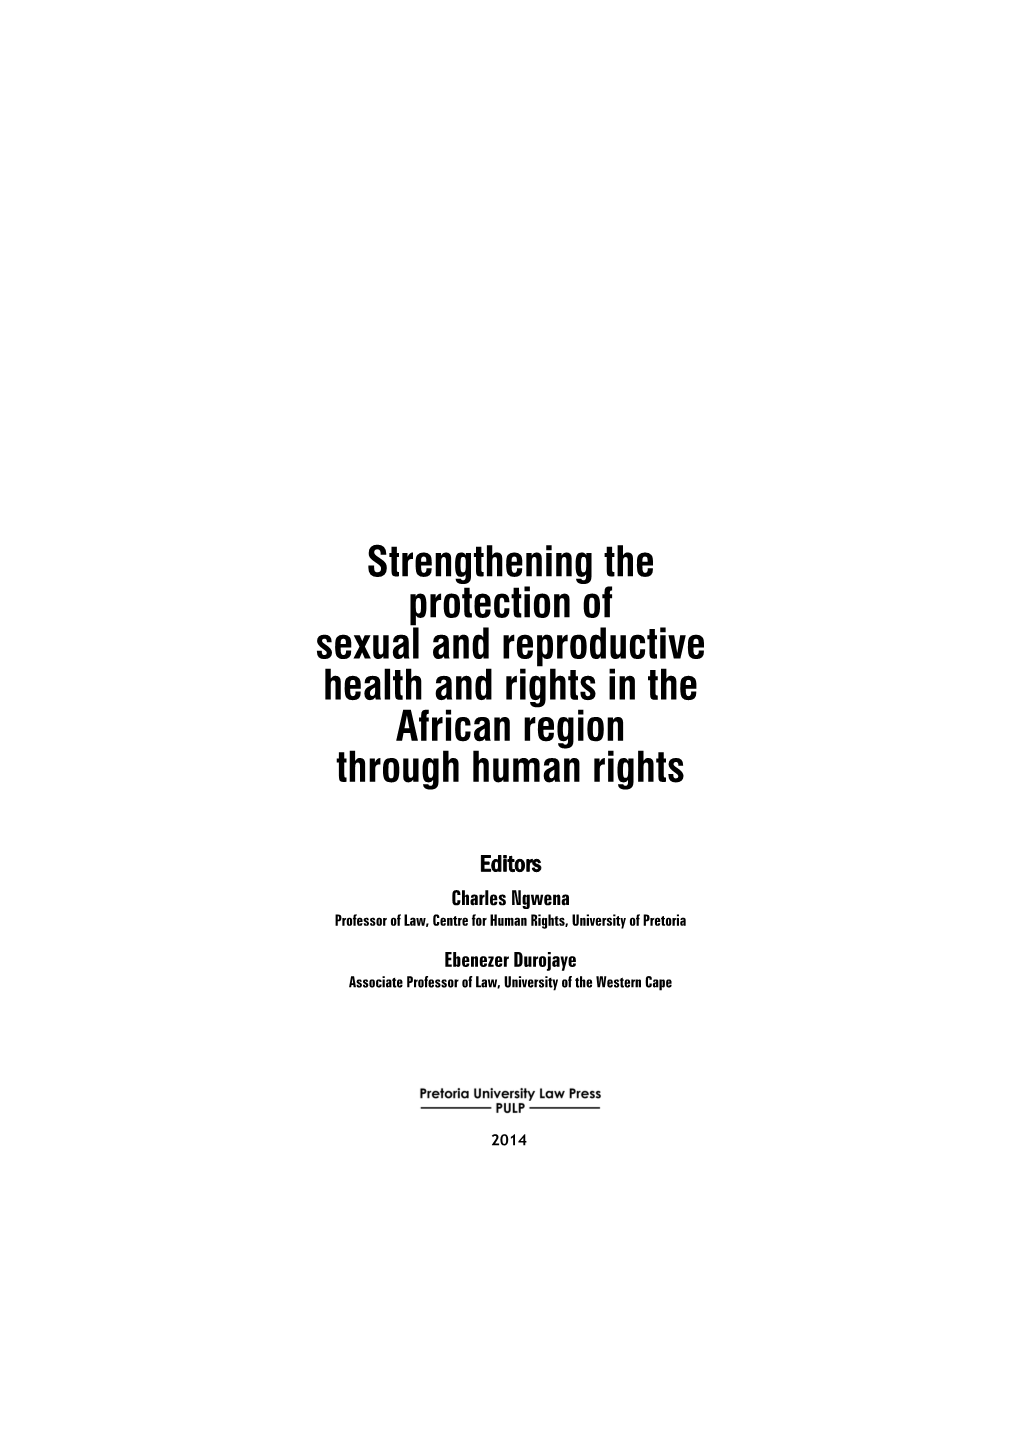 Strengthening the Protection of Sexual and Reproductive Health and Rights in the African Region Through Human Rights